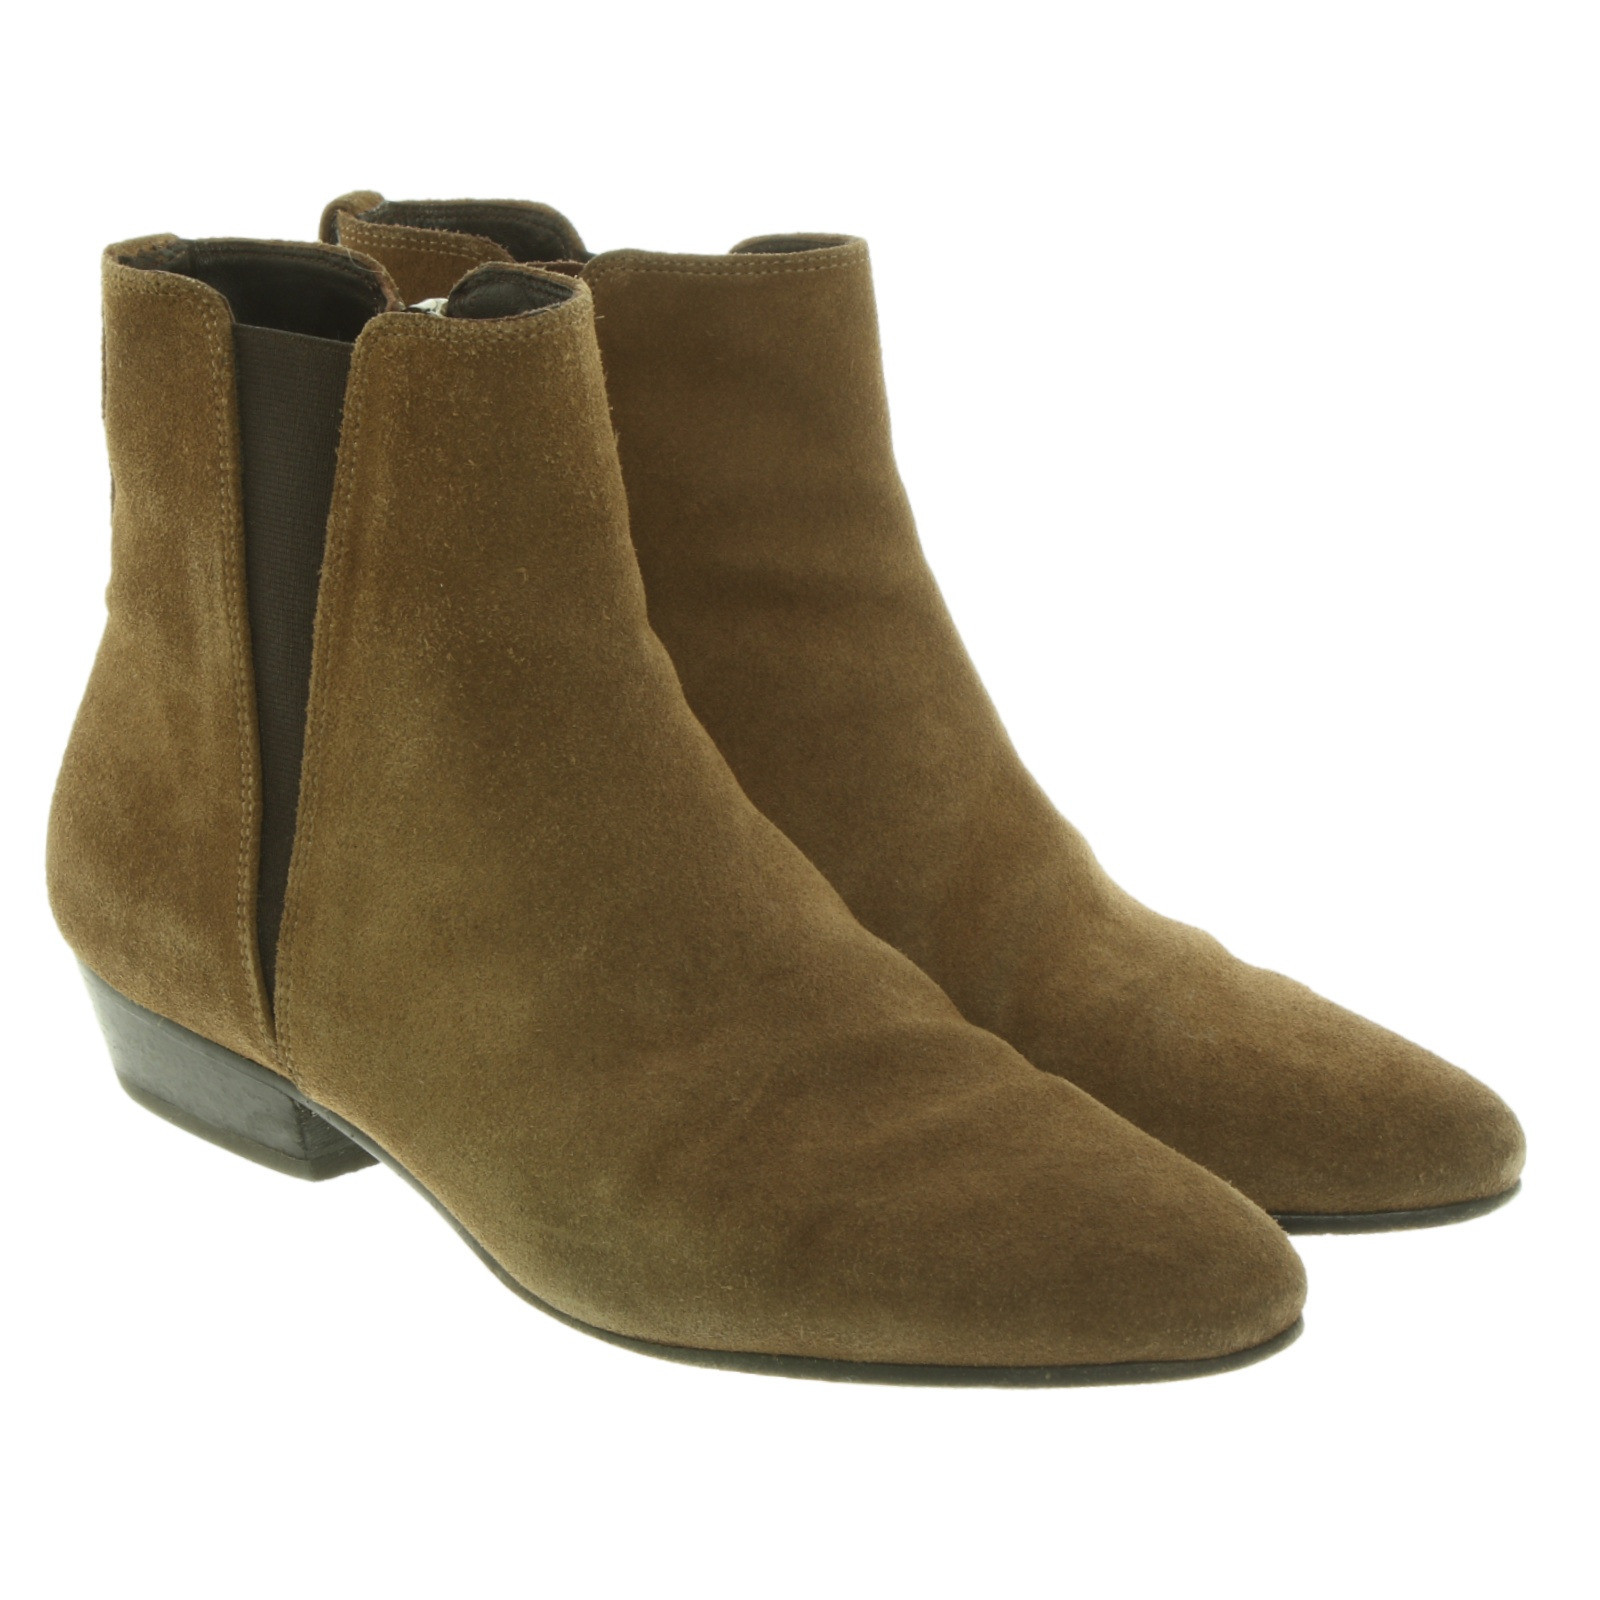 Isabel Marant Boots Leather In Olive Second Hand Isabel Marant Boots Leather In Olive Buy Used For 219